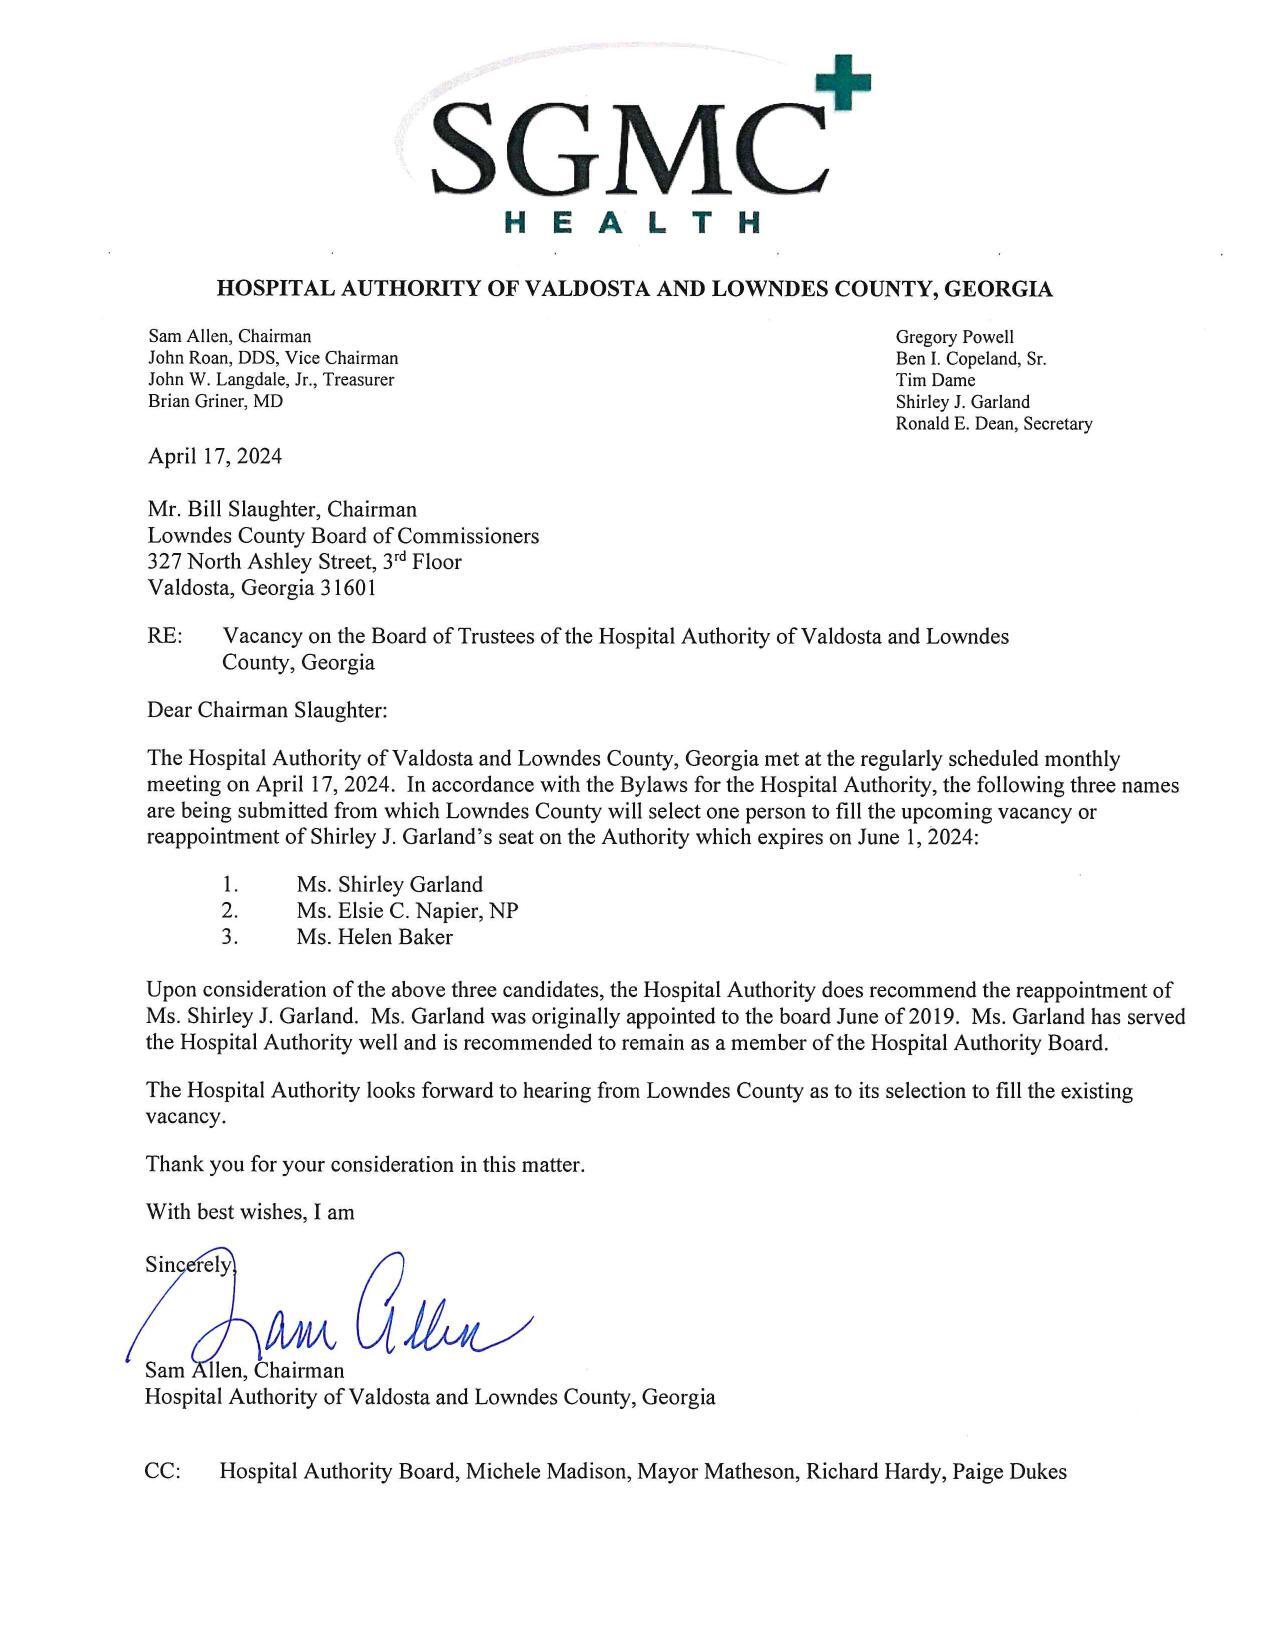 Letter from Hospital Authority Board